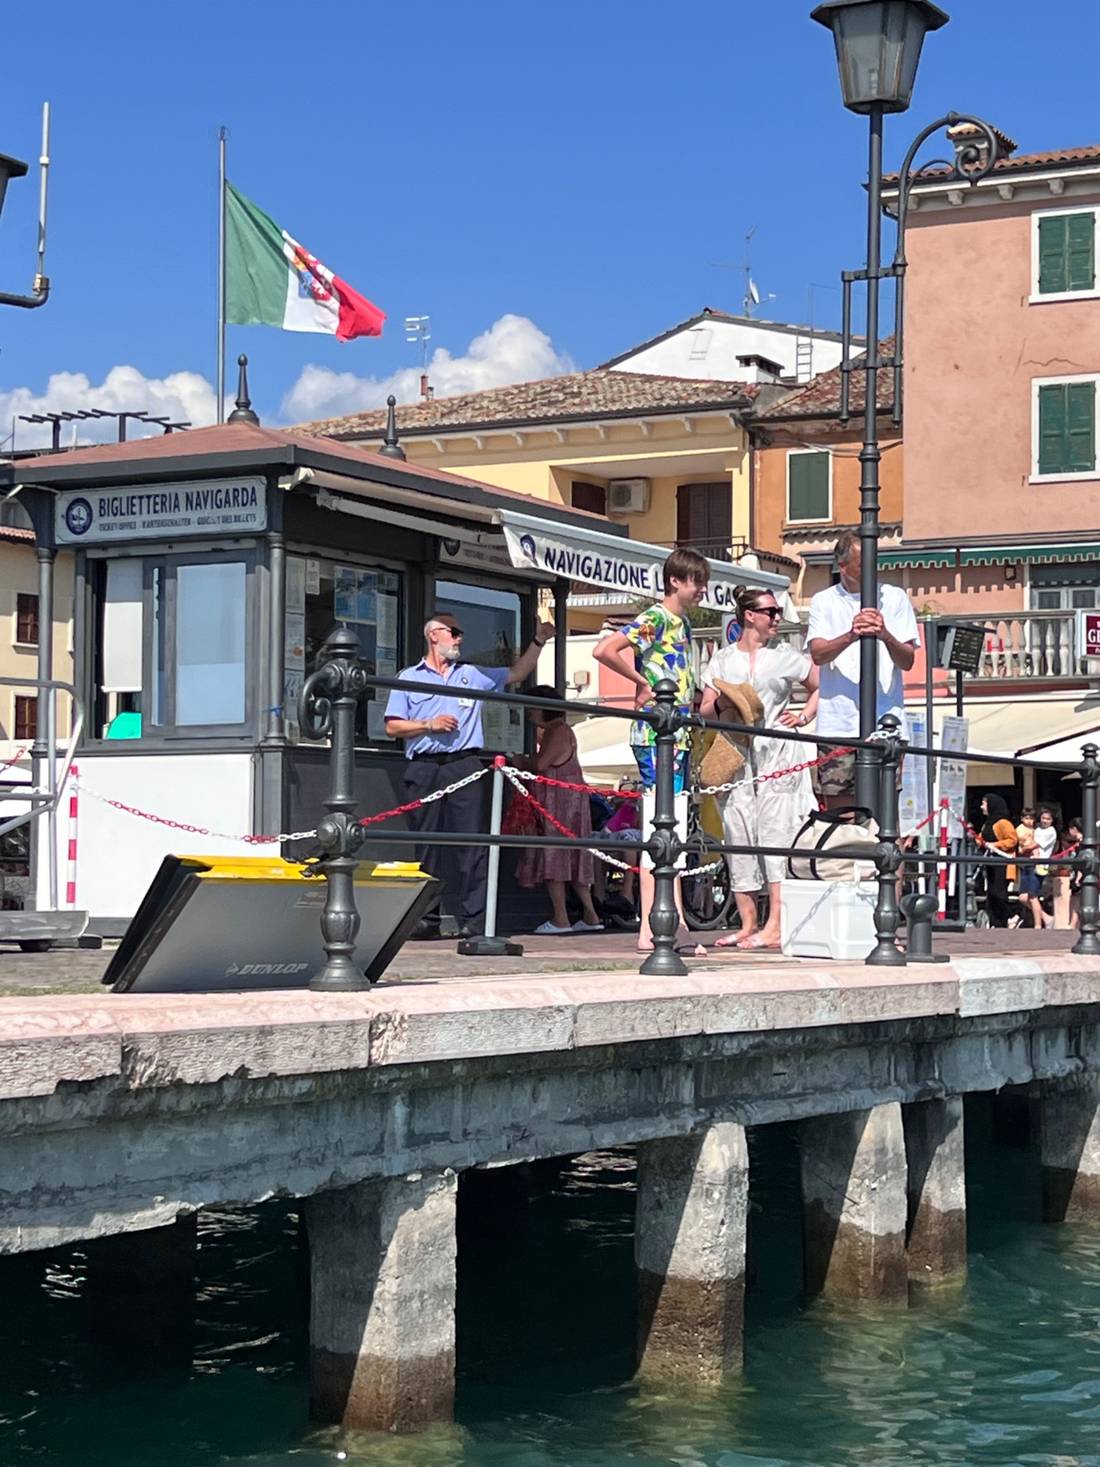 The boat ferry dock which will take you back to the other side to for example Desenzano.